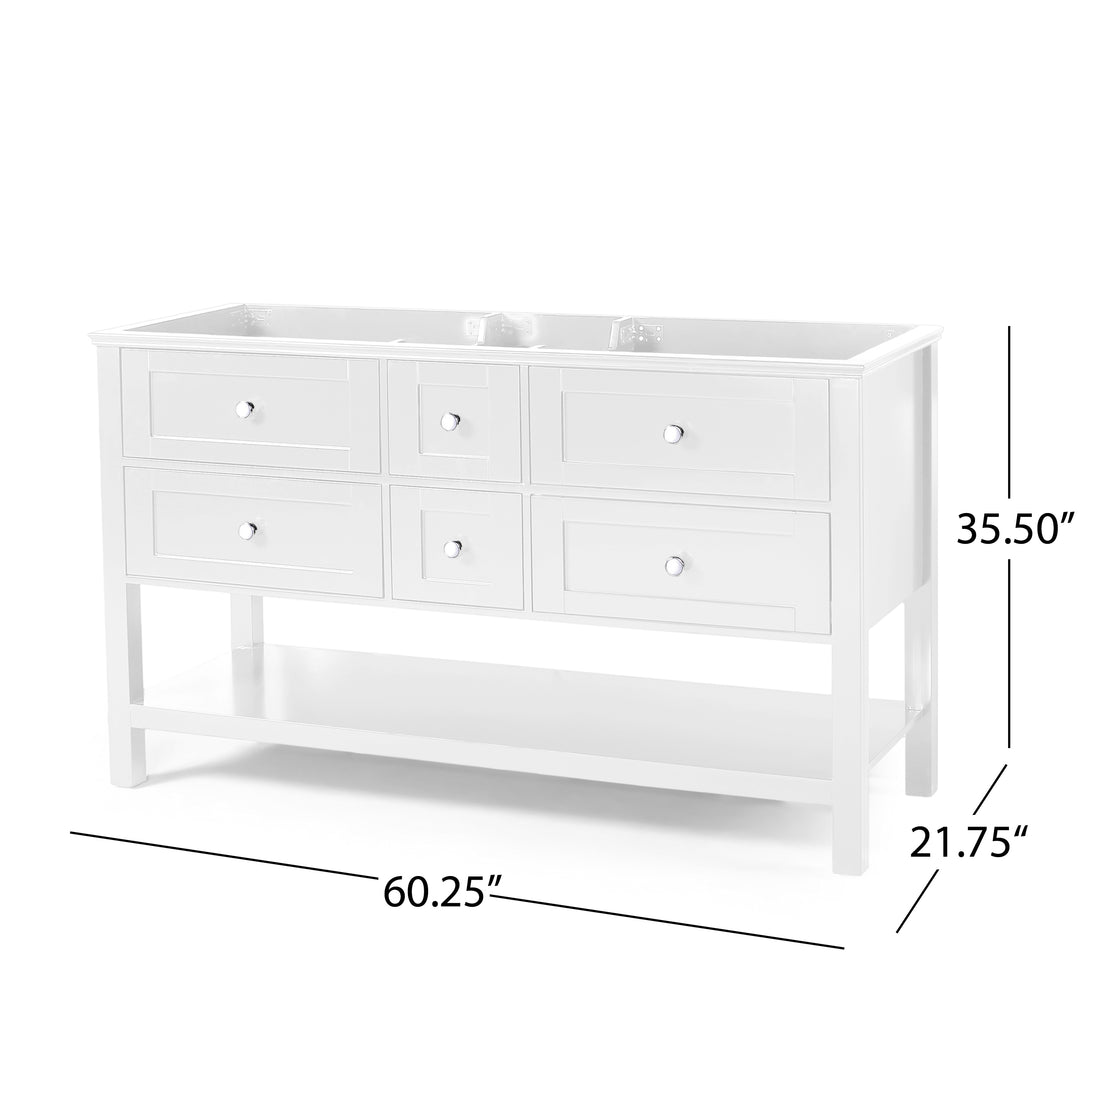 60'' Cabinet - White Plywood